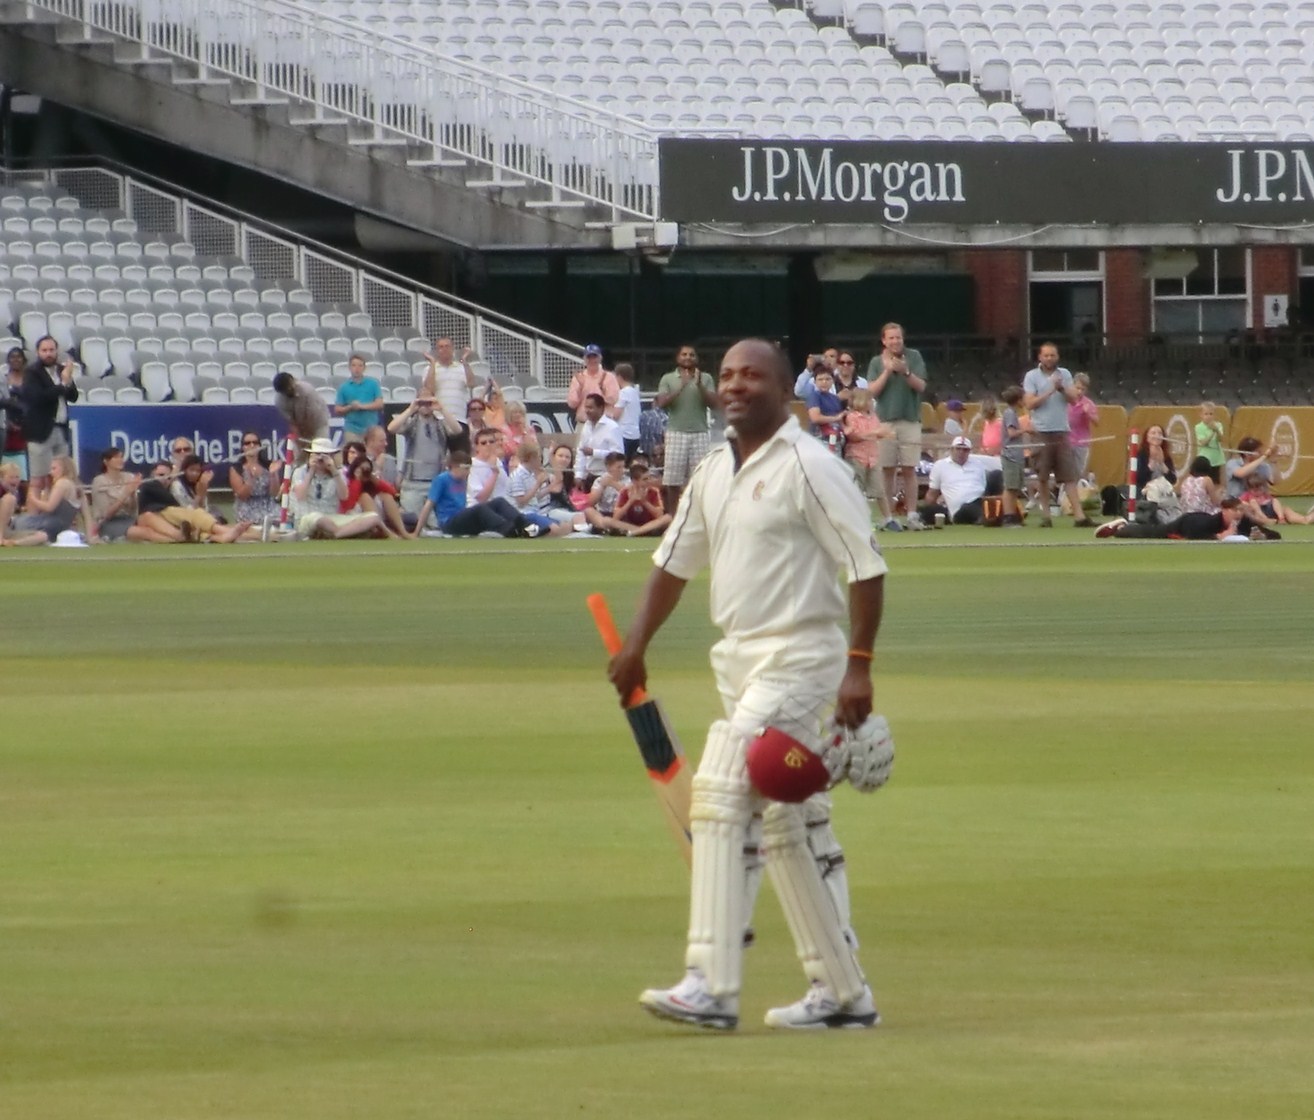 Brian Lara walks in after his blistering performance ©ITG